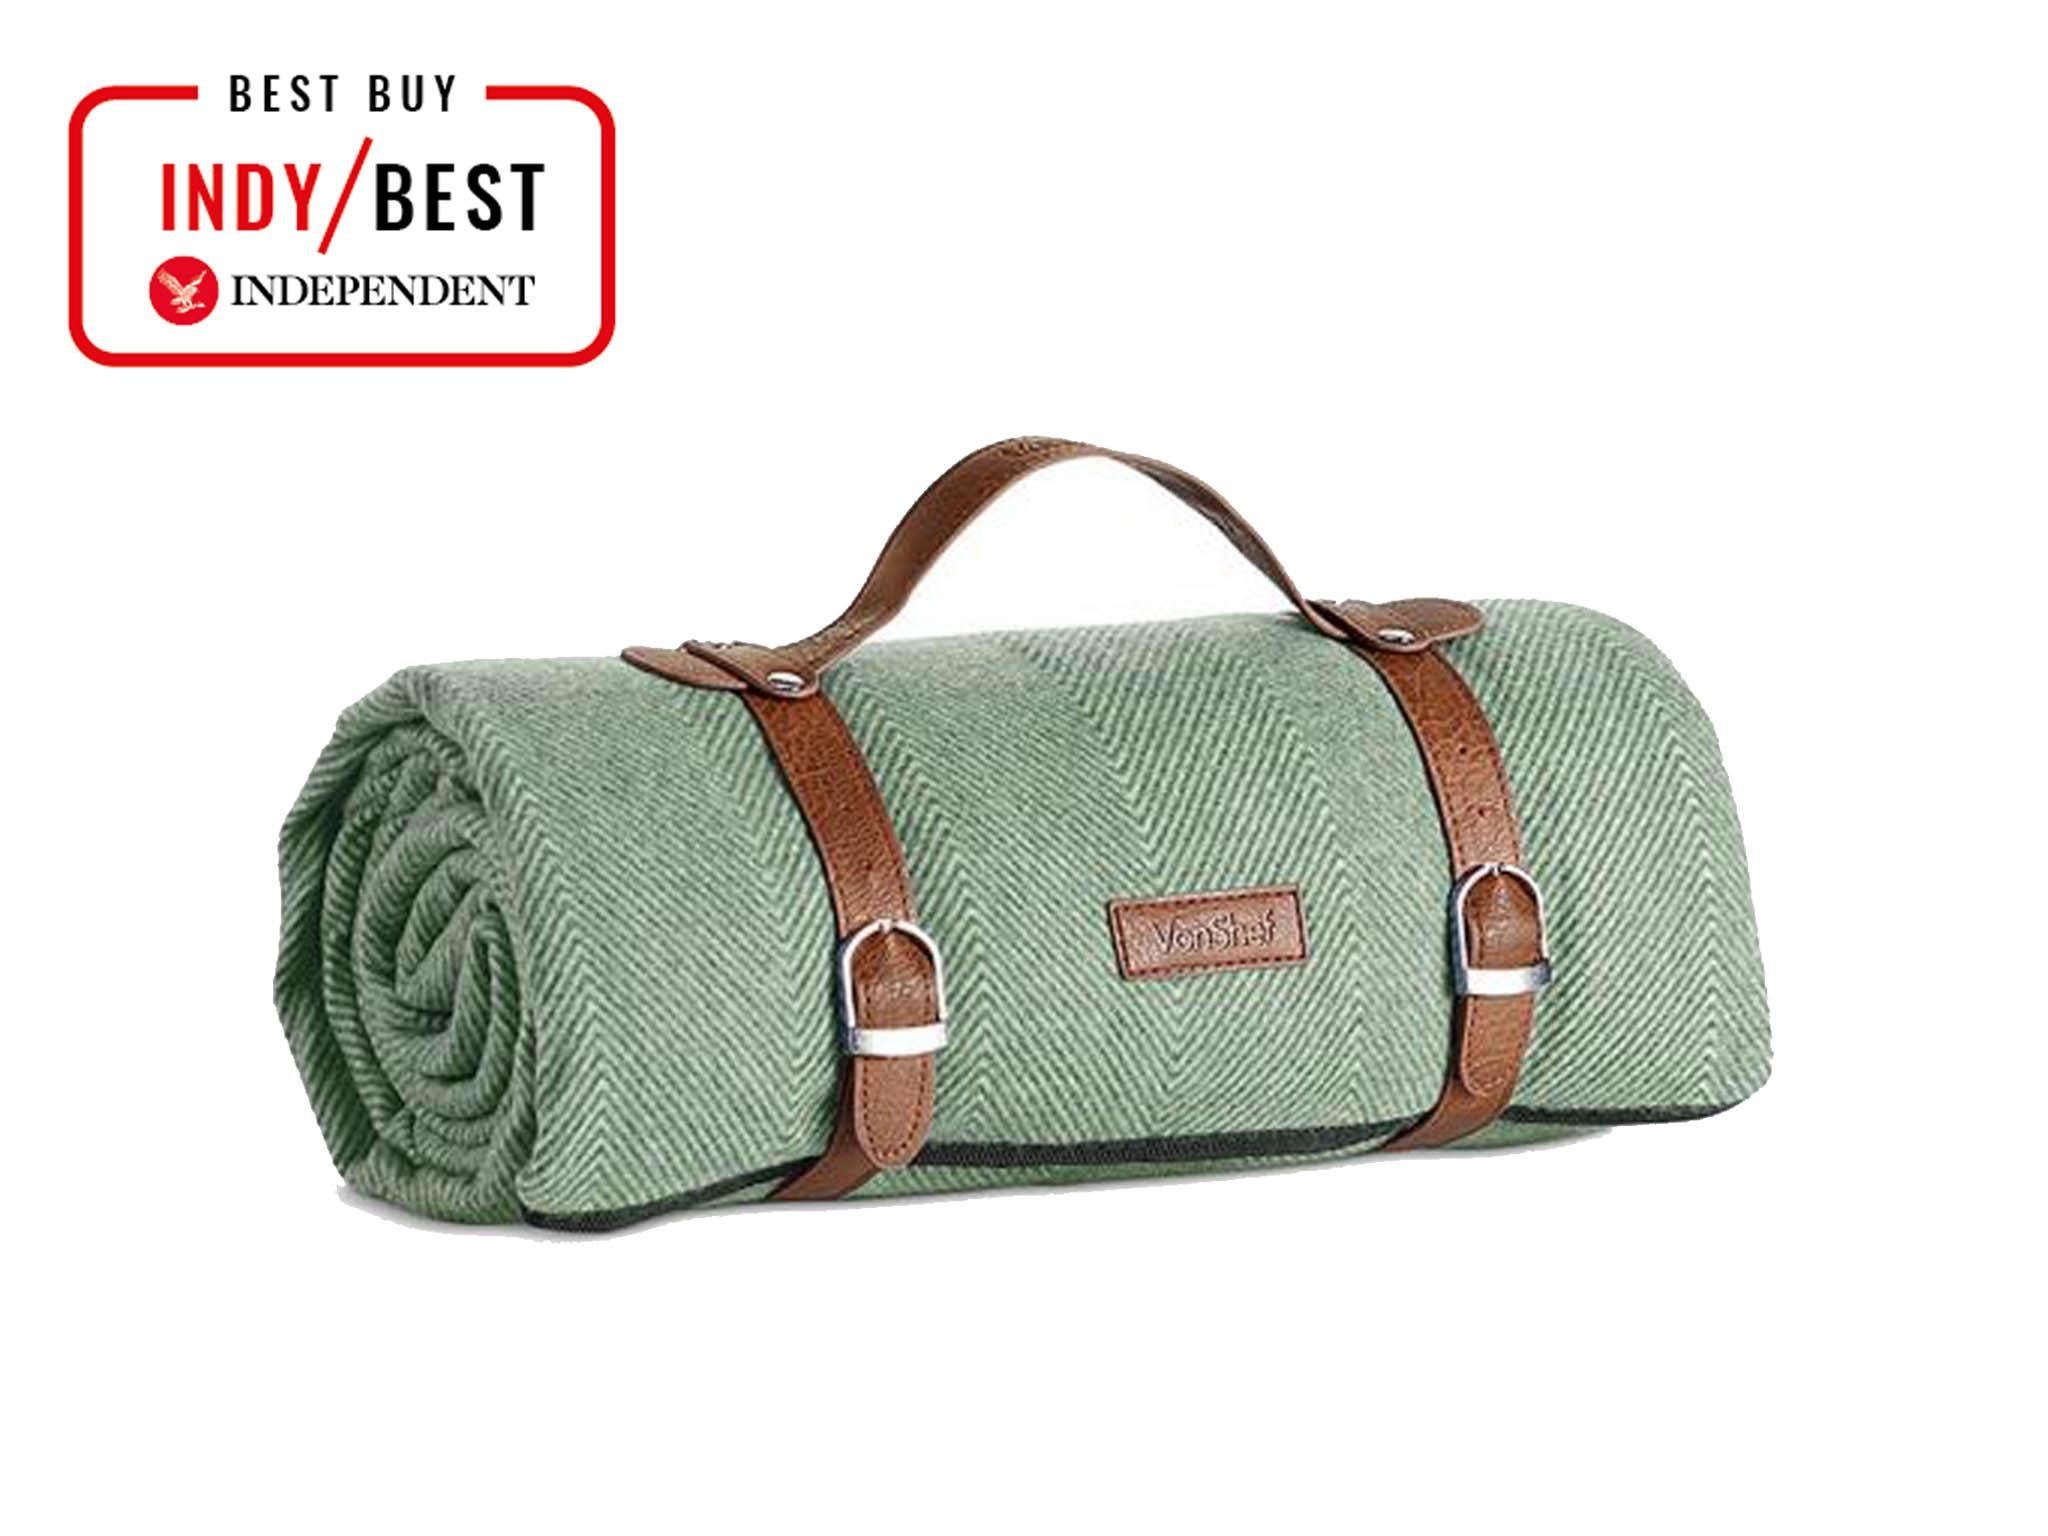 This picnic blanket from Von Shef looks smart and rolls up easily to be secured with dark brown leather-look carry straps (VonShef)